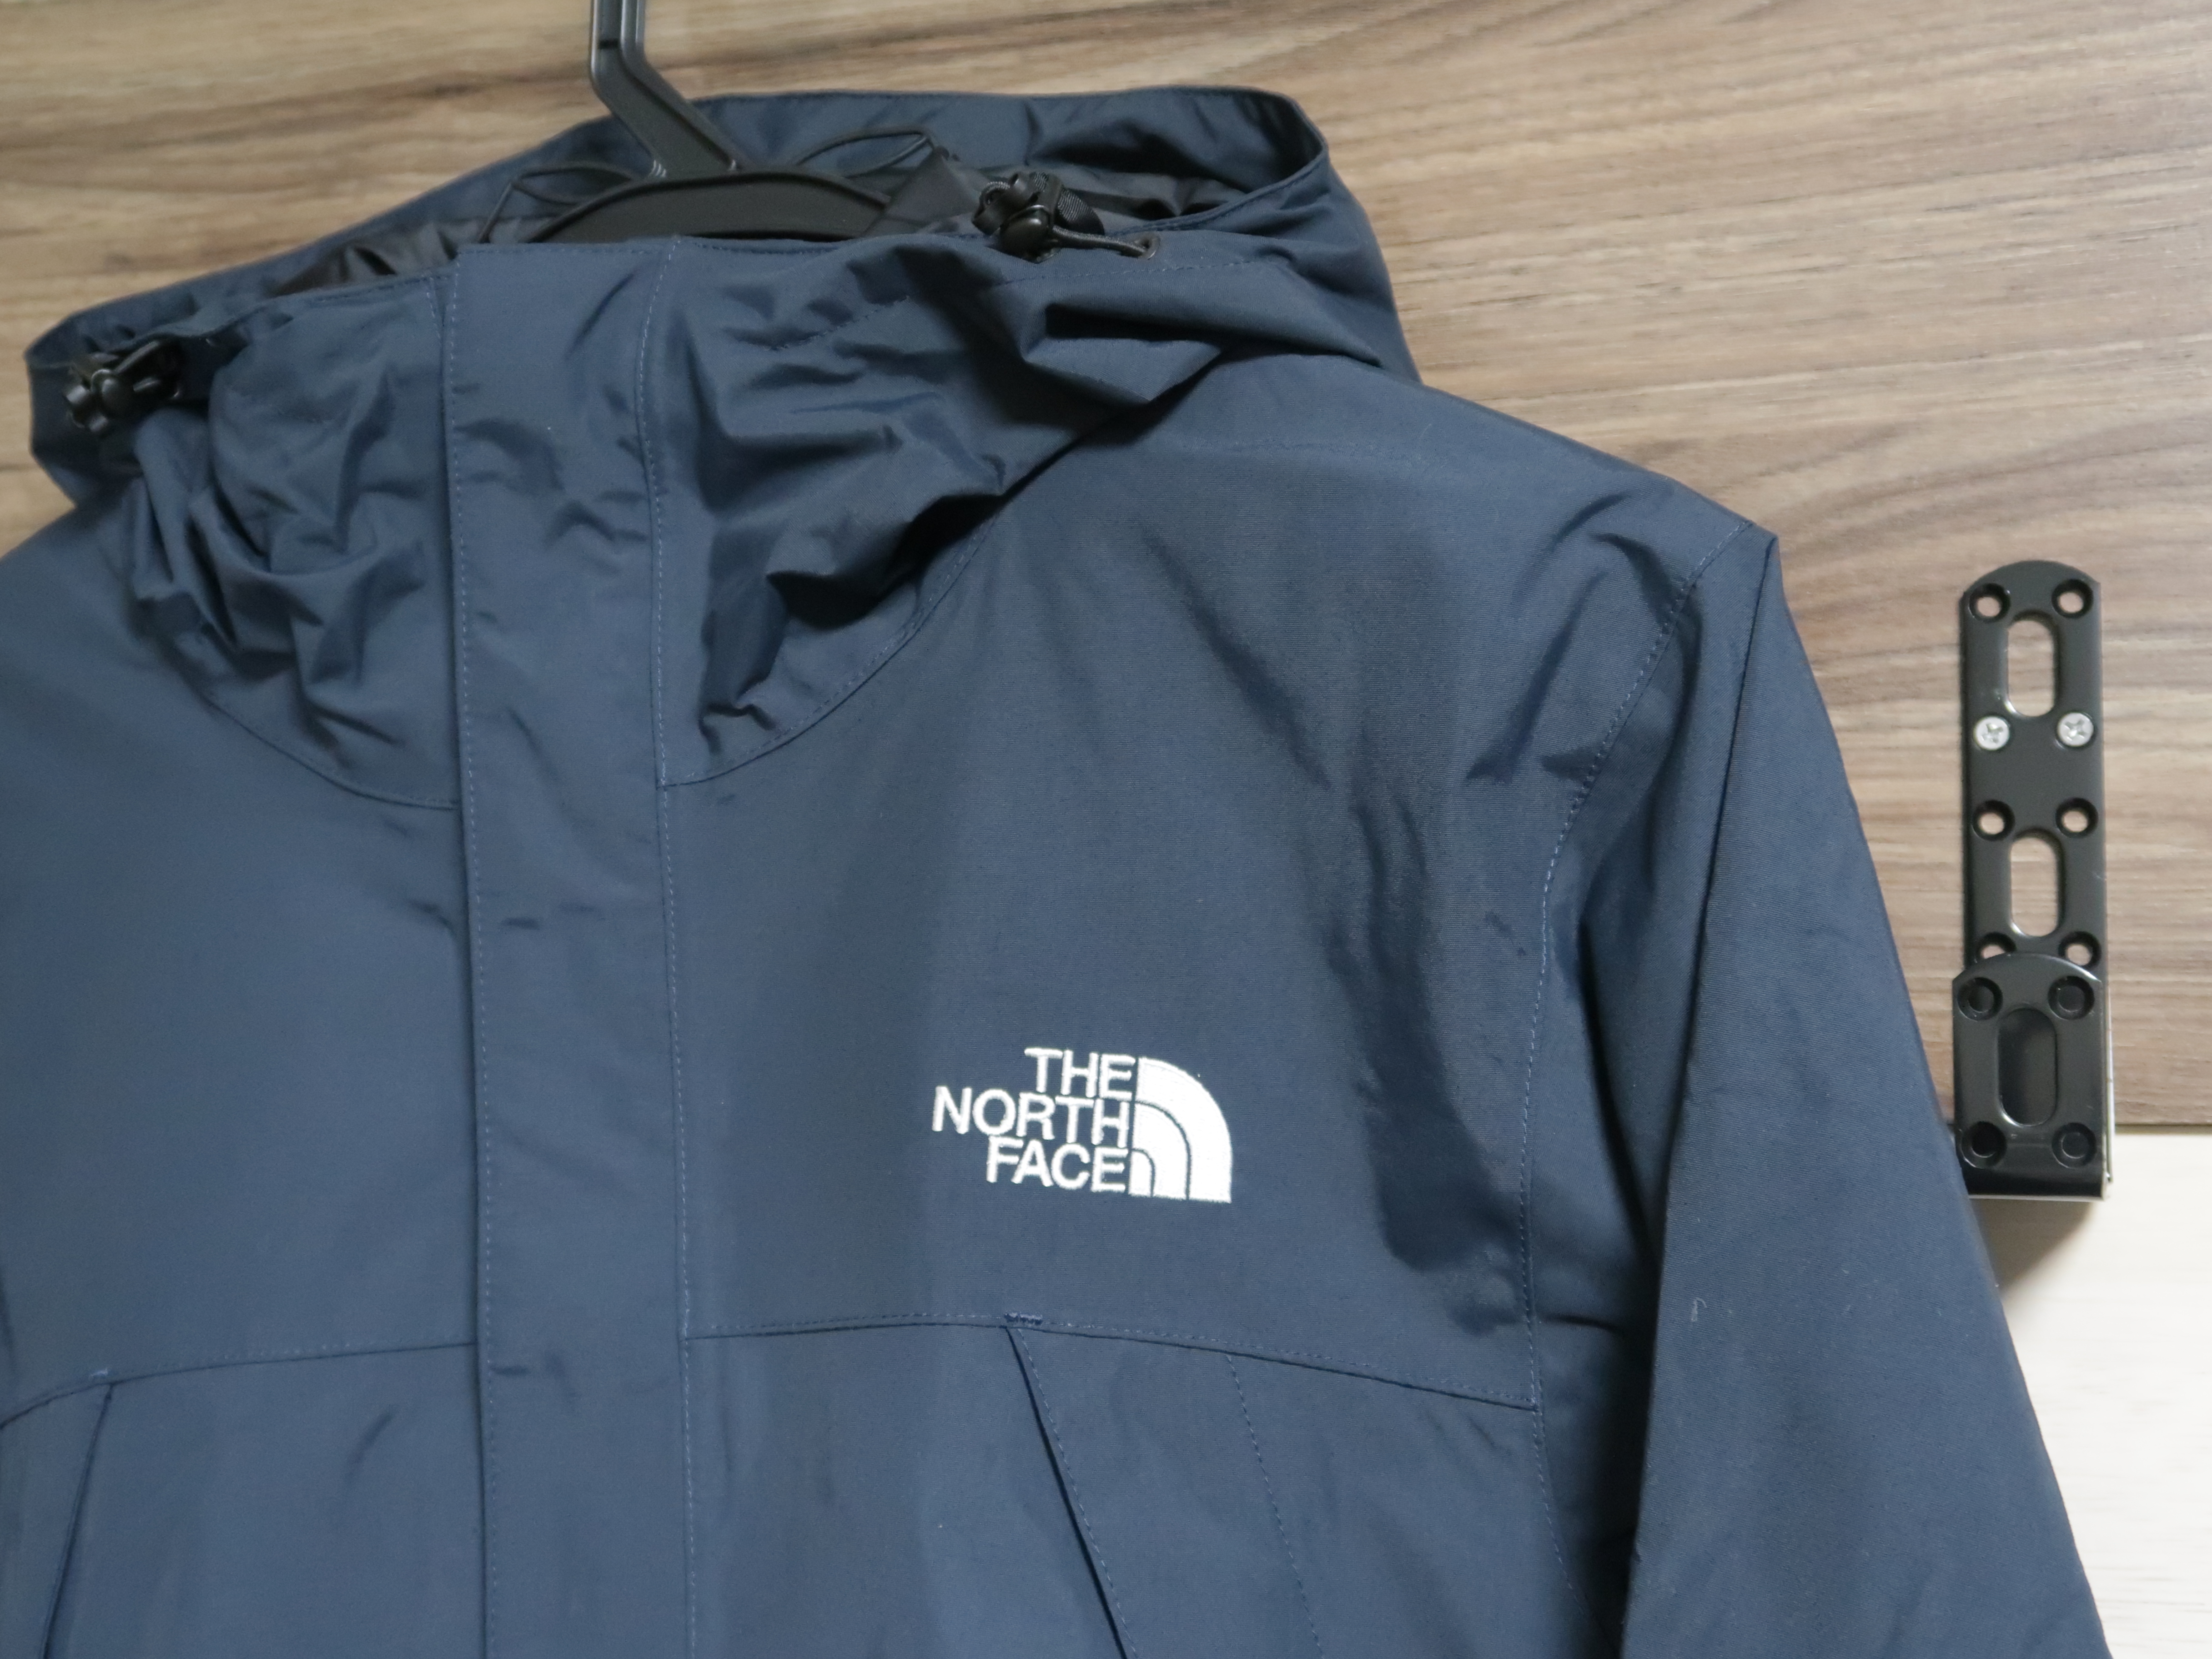 THE NORTH FACE】スクープジャケットのサイズ感など写真付きでレビュー 